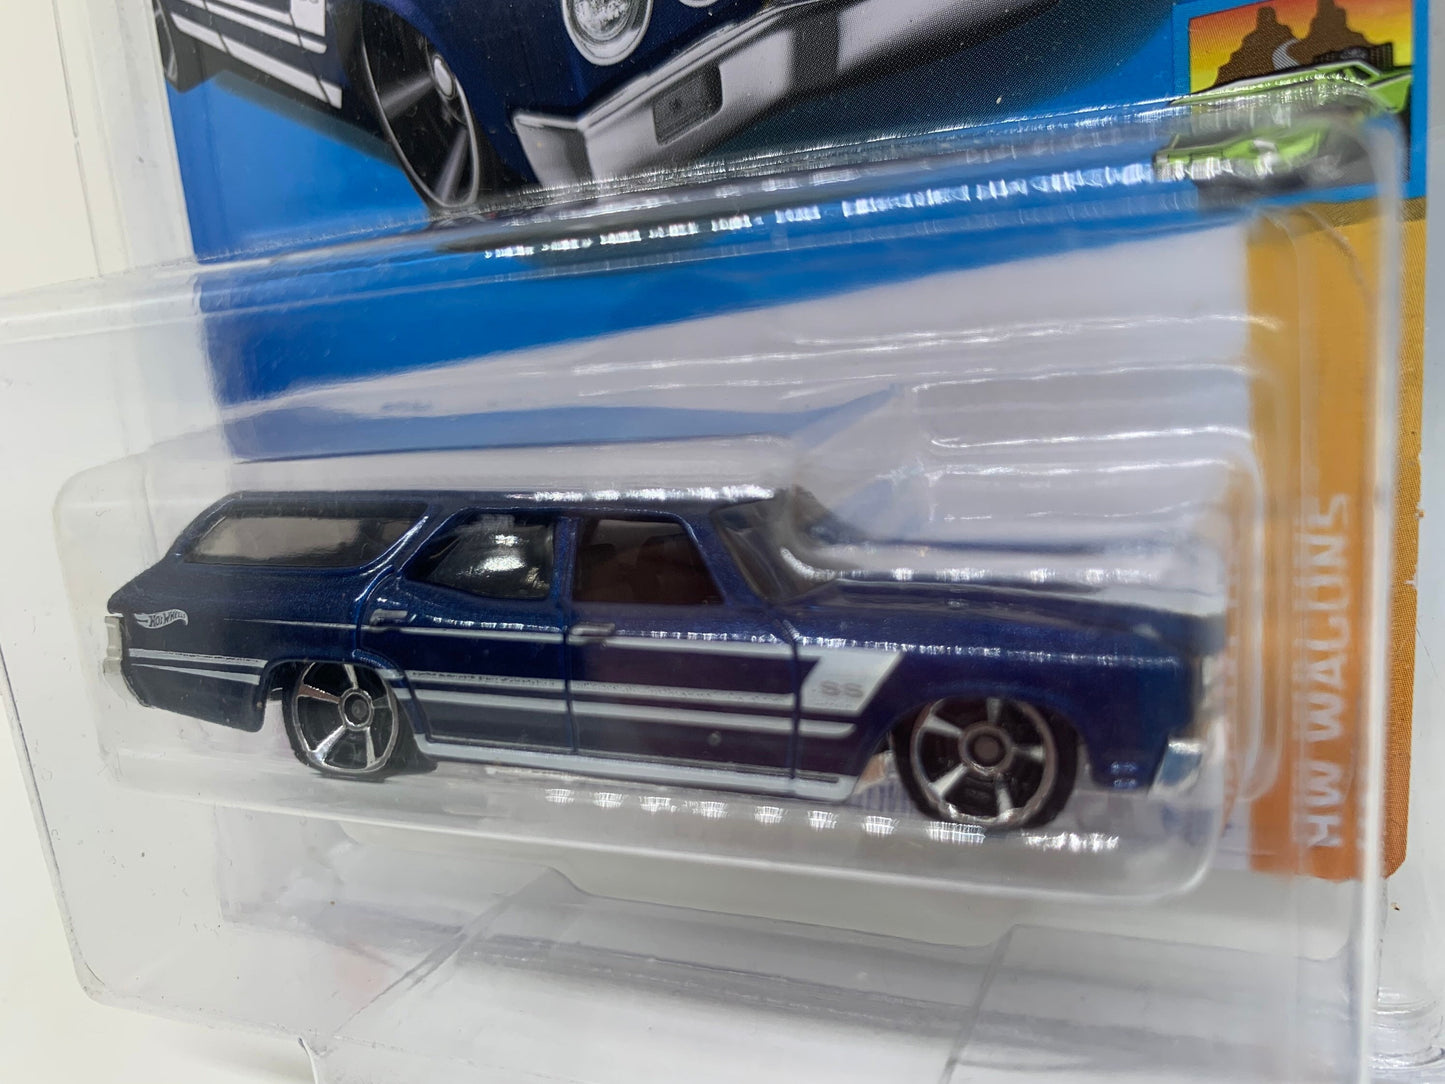 Hot Wheels '70 Chevelle SS Wagon Metalflake Dark Blue HW Wagons Perfect Birthday Gift Miniature Collectable Scale Model Toy Car